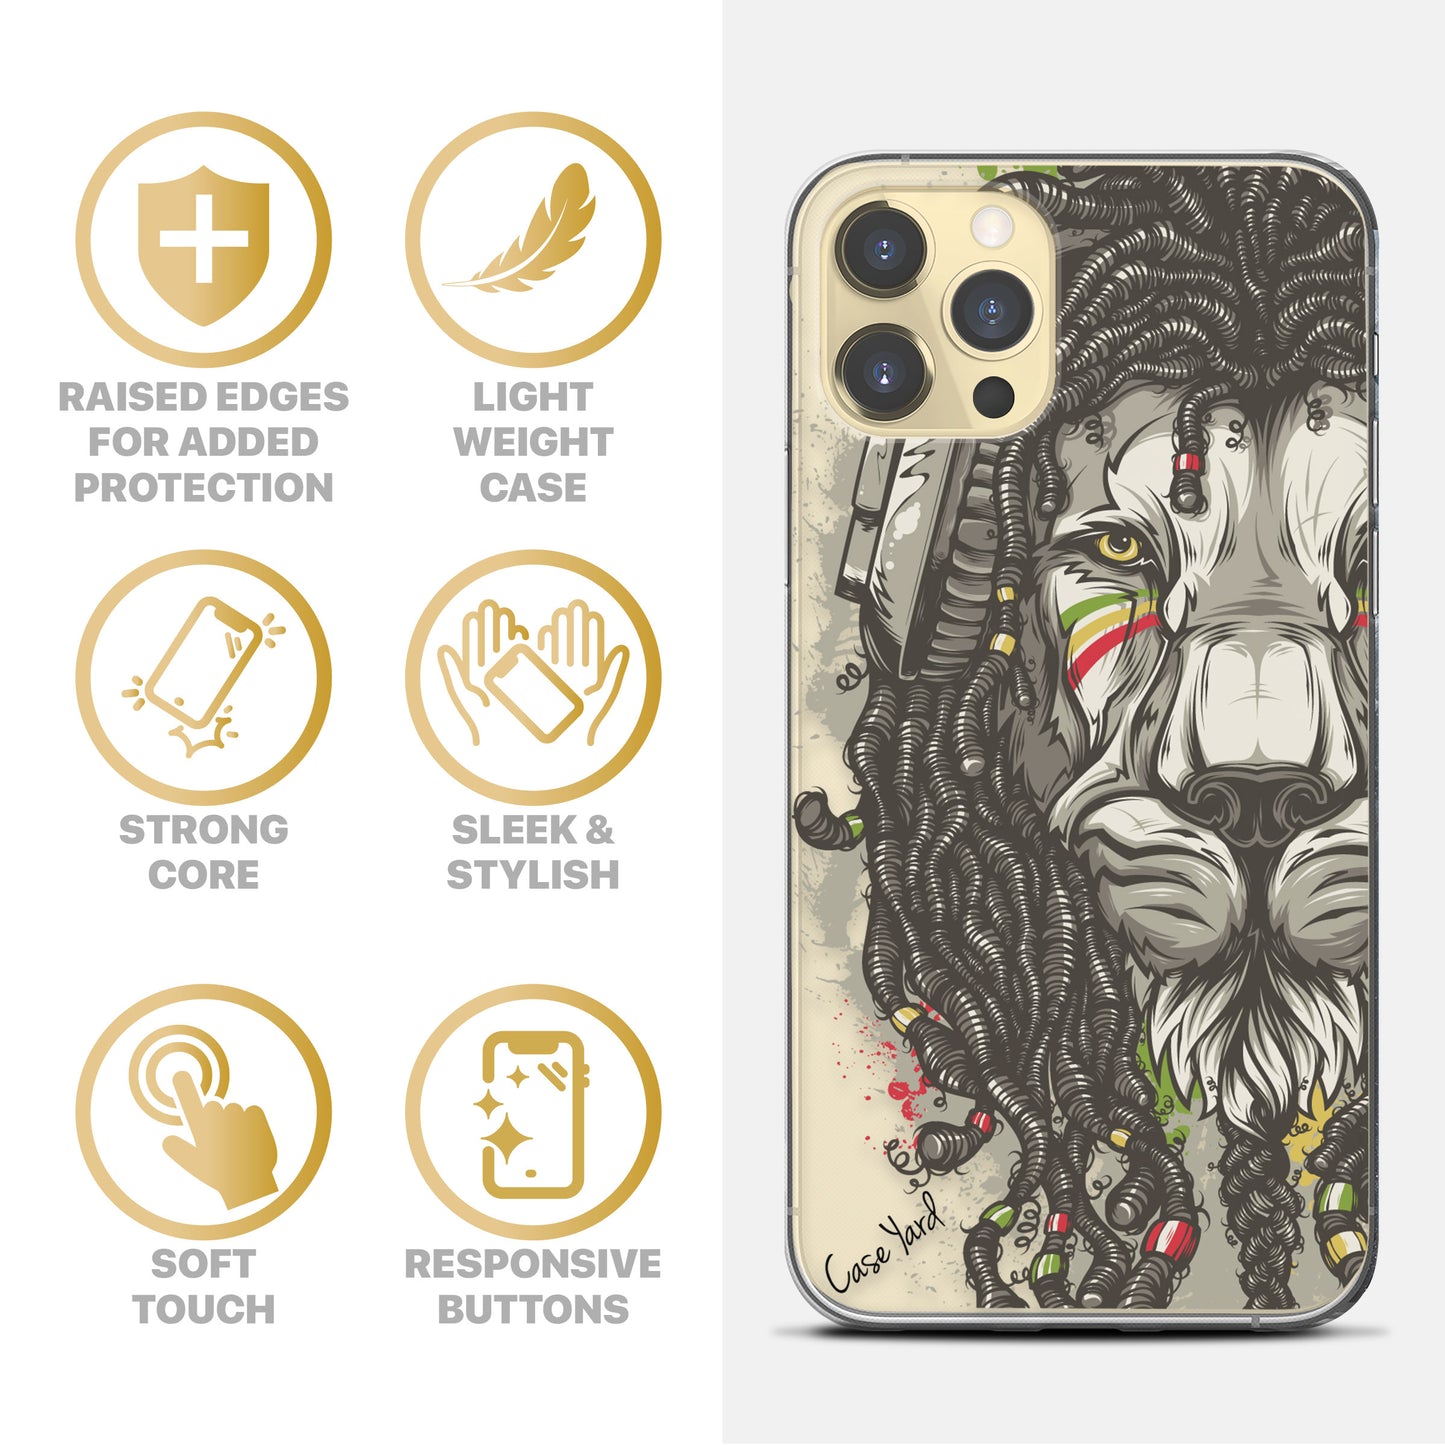 TPU Clear case with (Rasta Lion) Design for iPhone & Samsung Phones